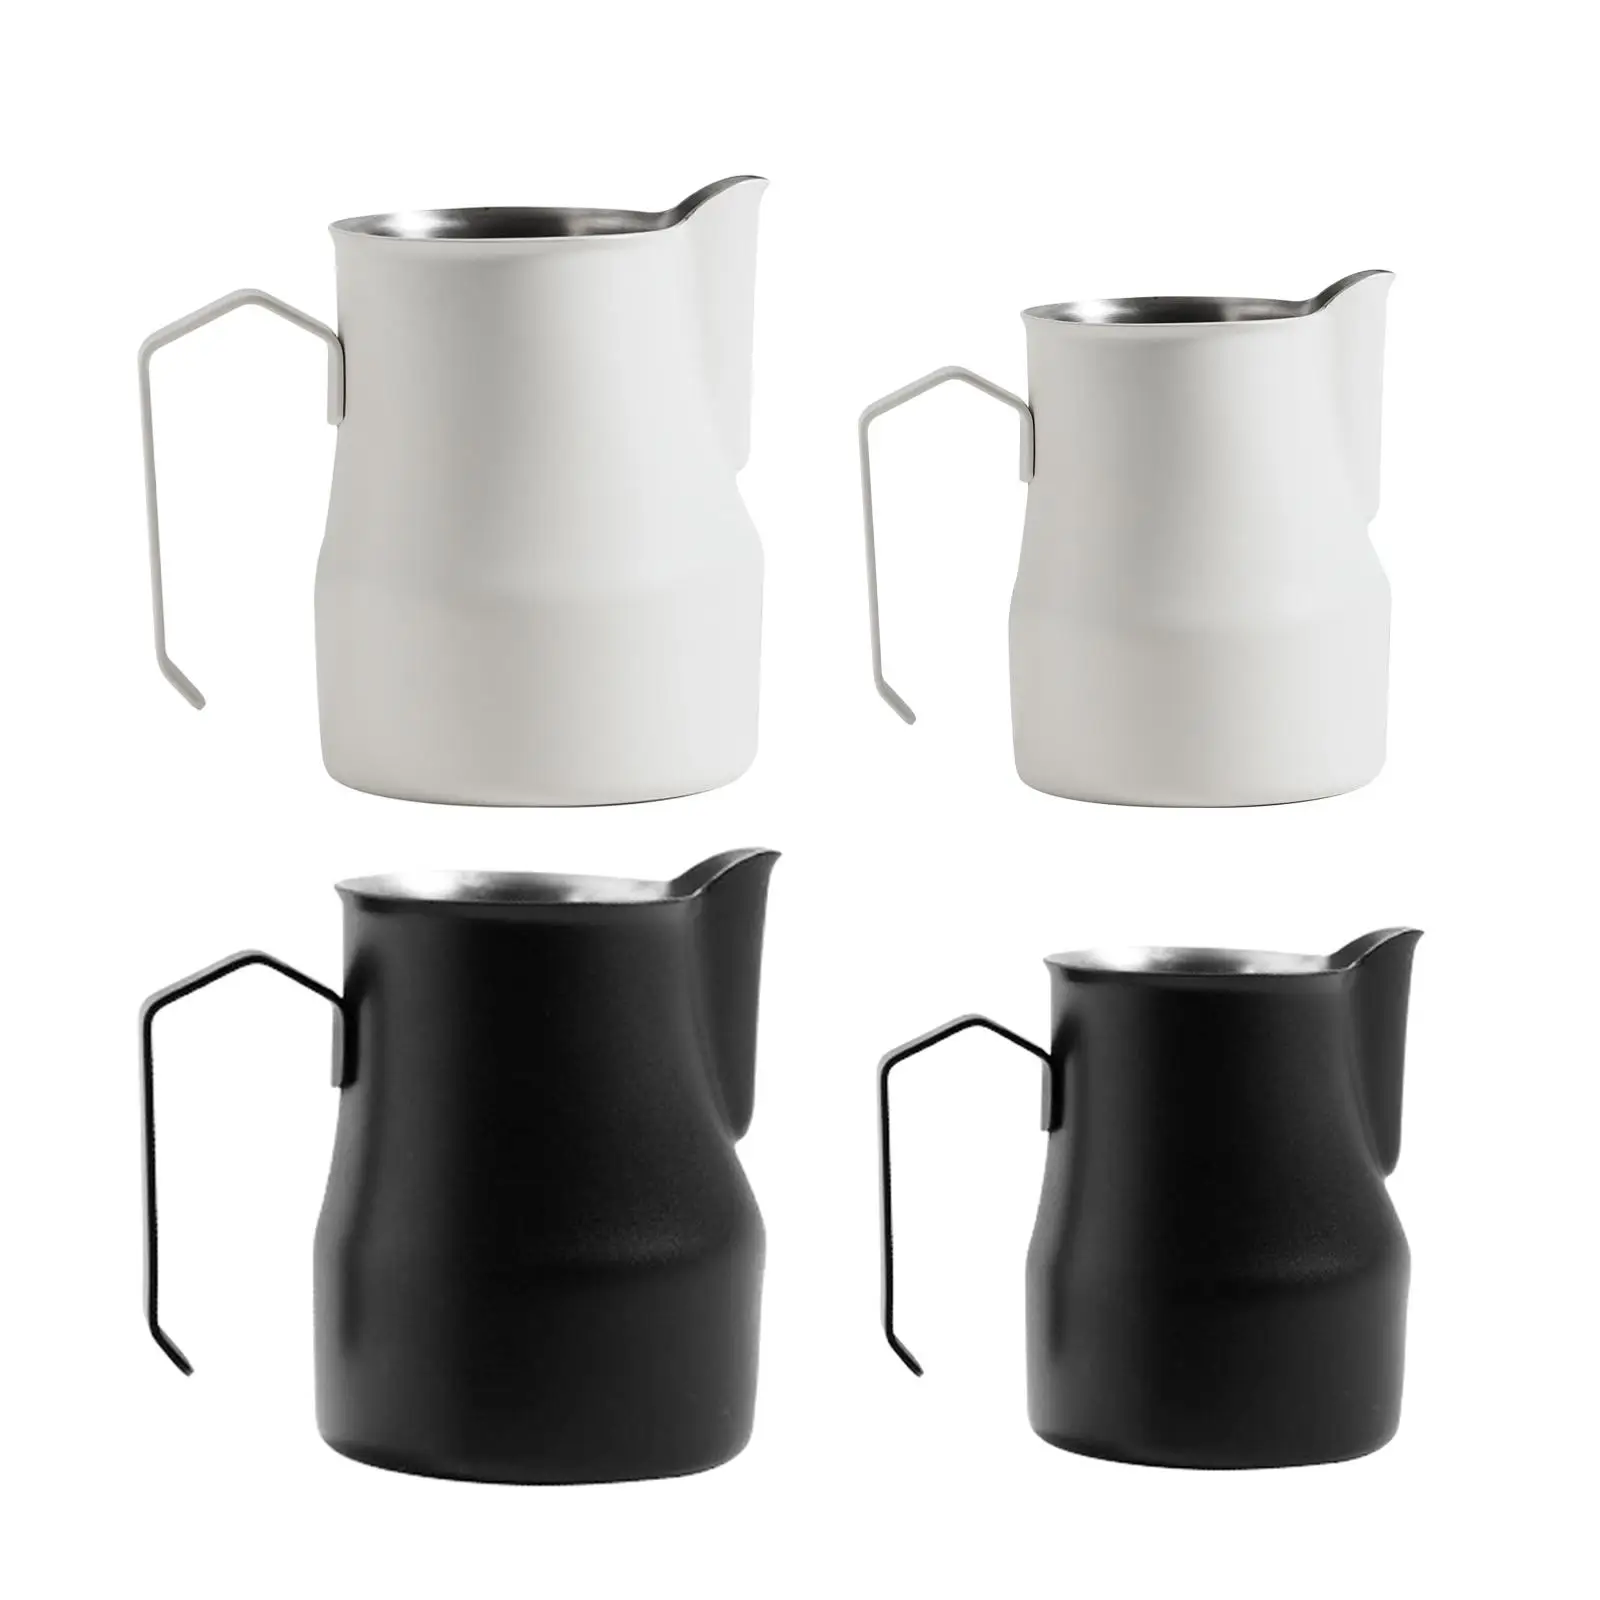 Coffee Milk Frothing Jug Espresso Steaming Pitcher for DIY Coffee Kitchen